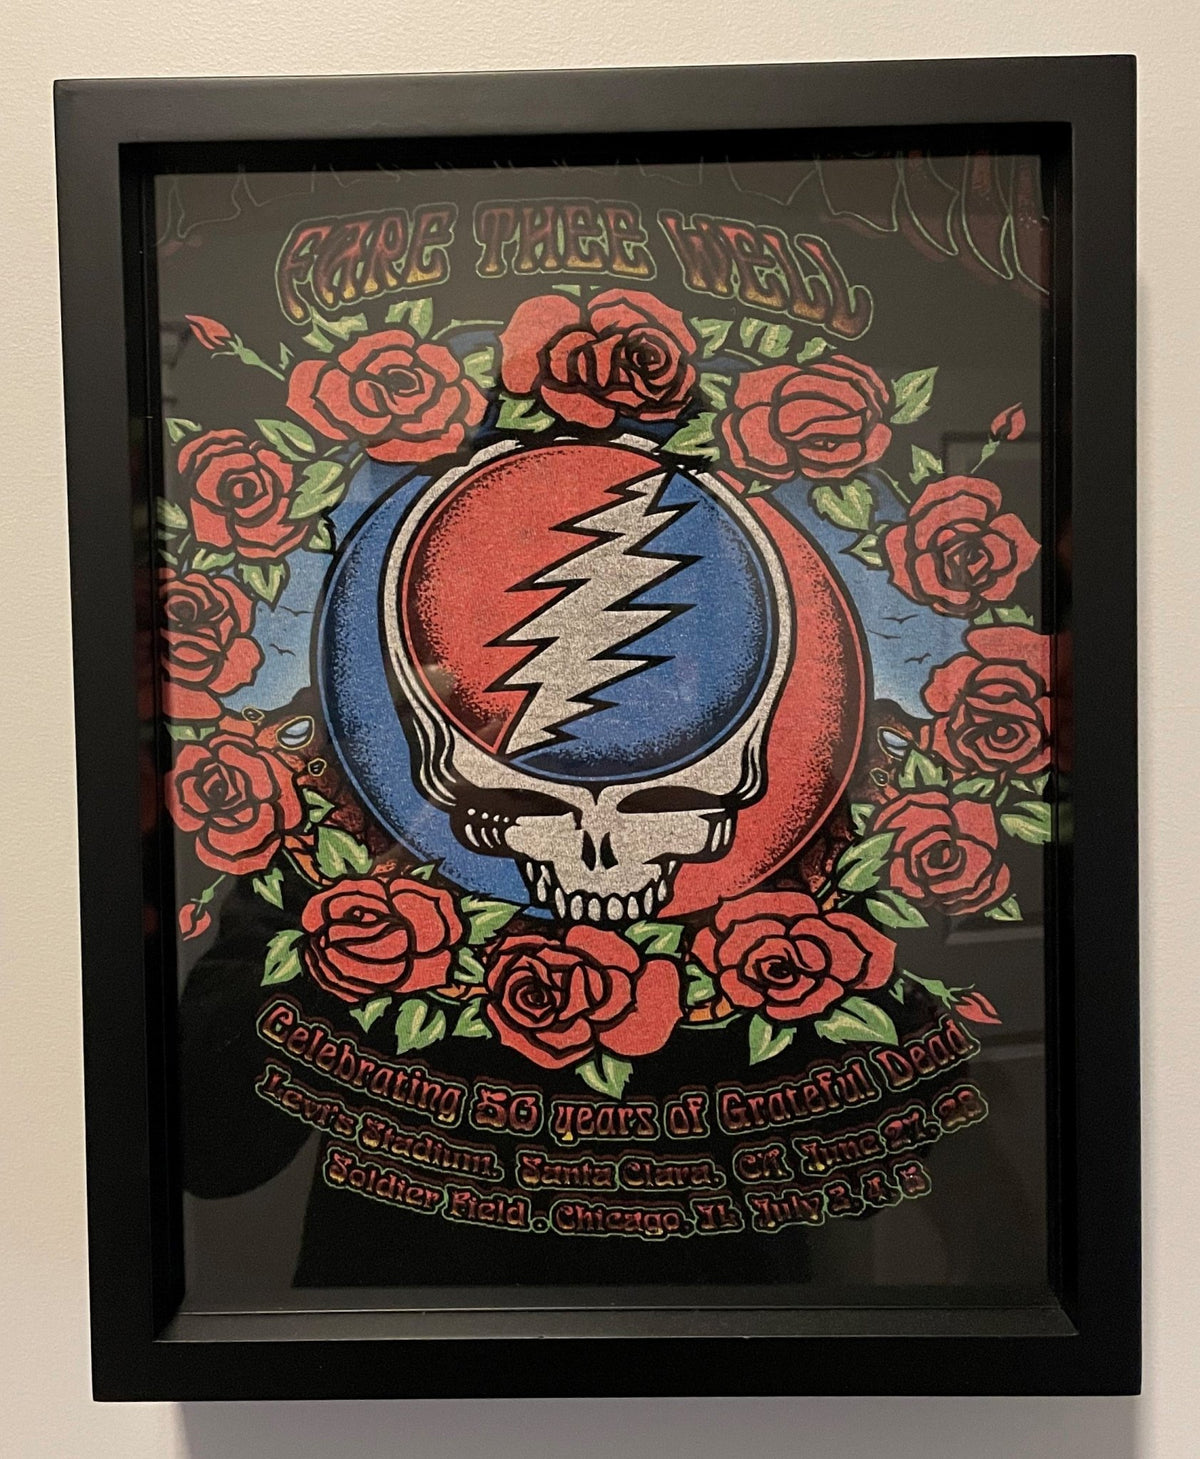 Grateful Dead Fare Thee Well T-Shirt Framed and Displayed in a Shart Original T-Shirt Frame